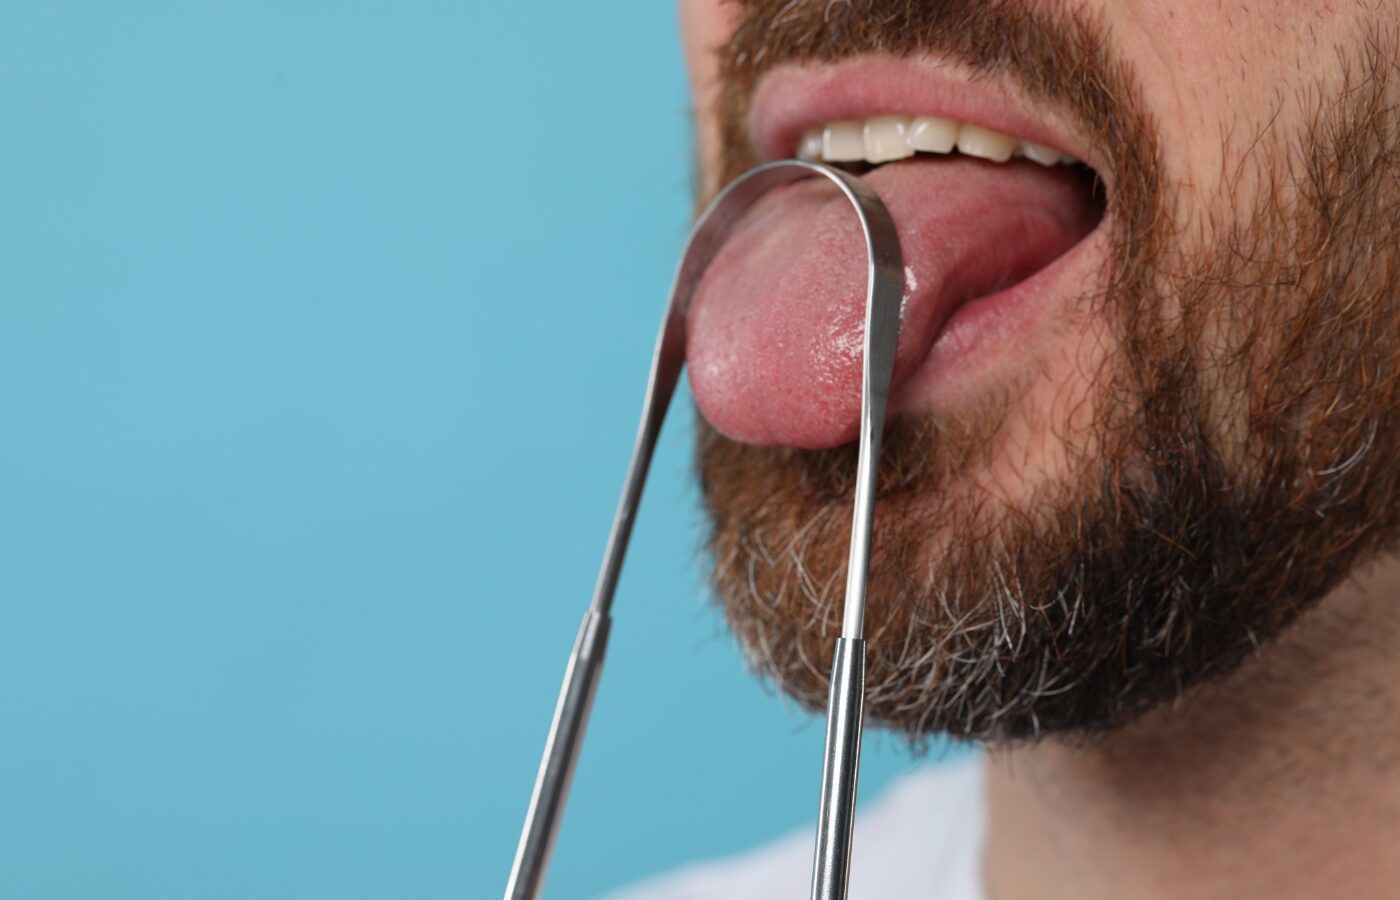 Blue background with man using a metal tongue scaper on his tongue